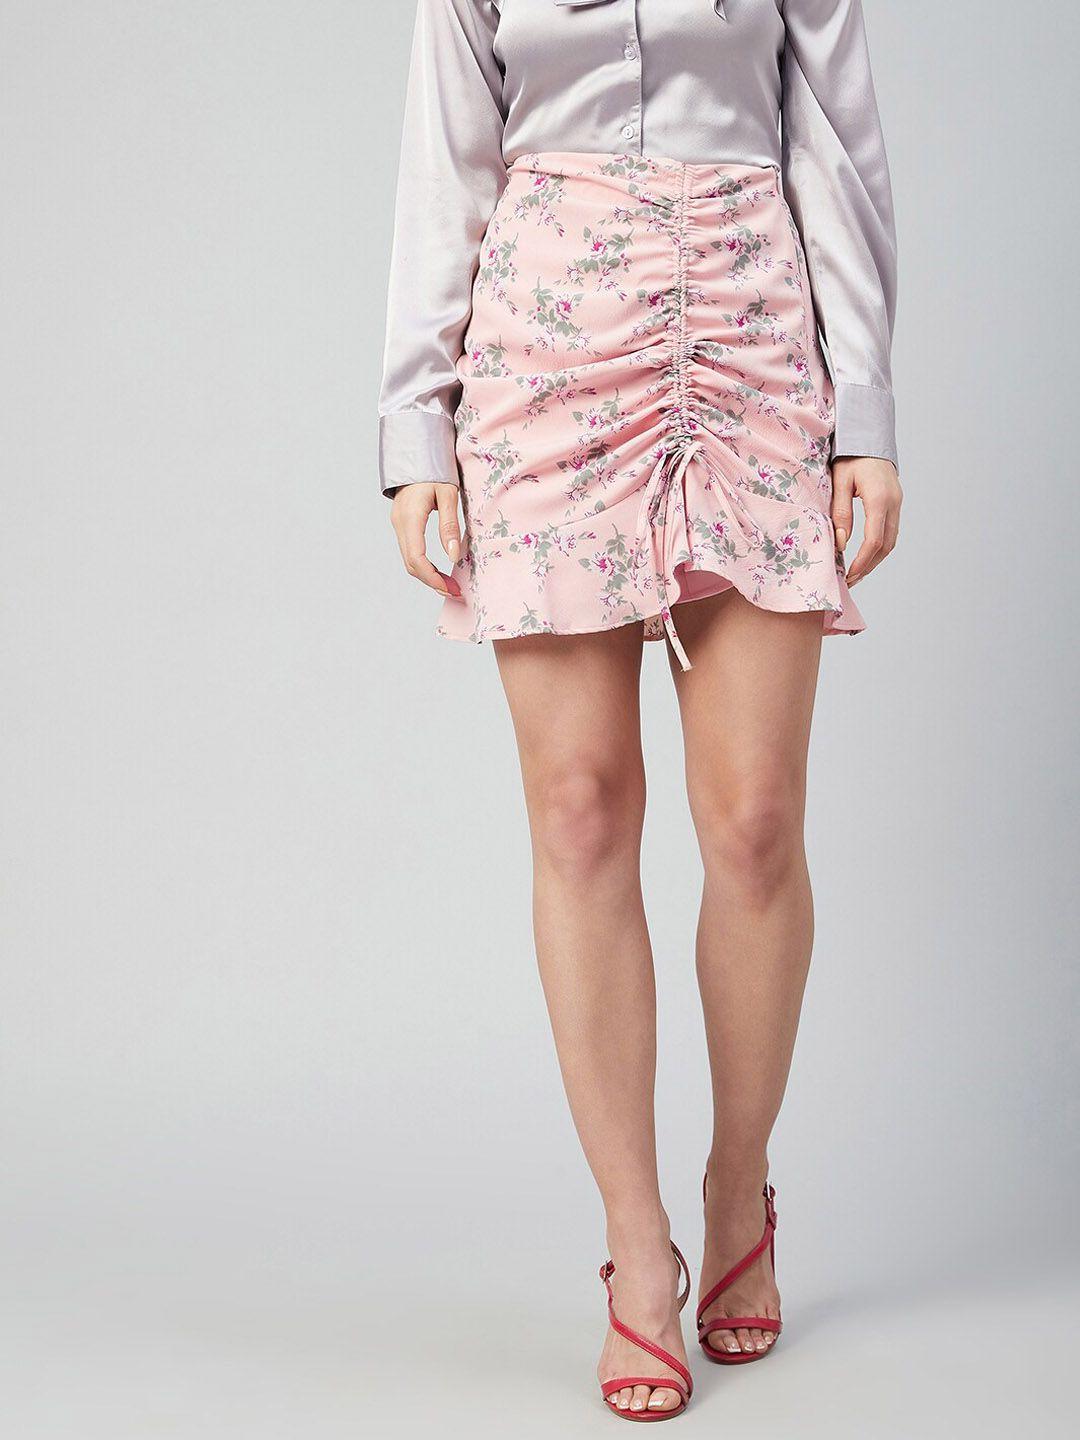 marie claire printed mini straight skirt